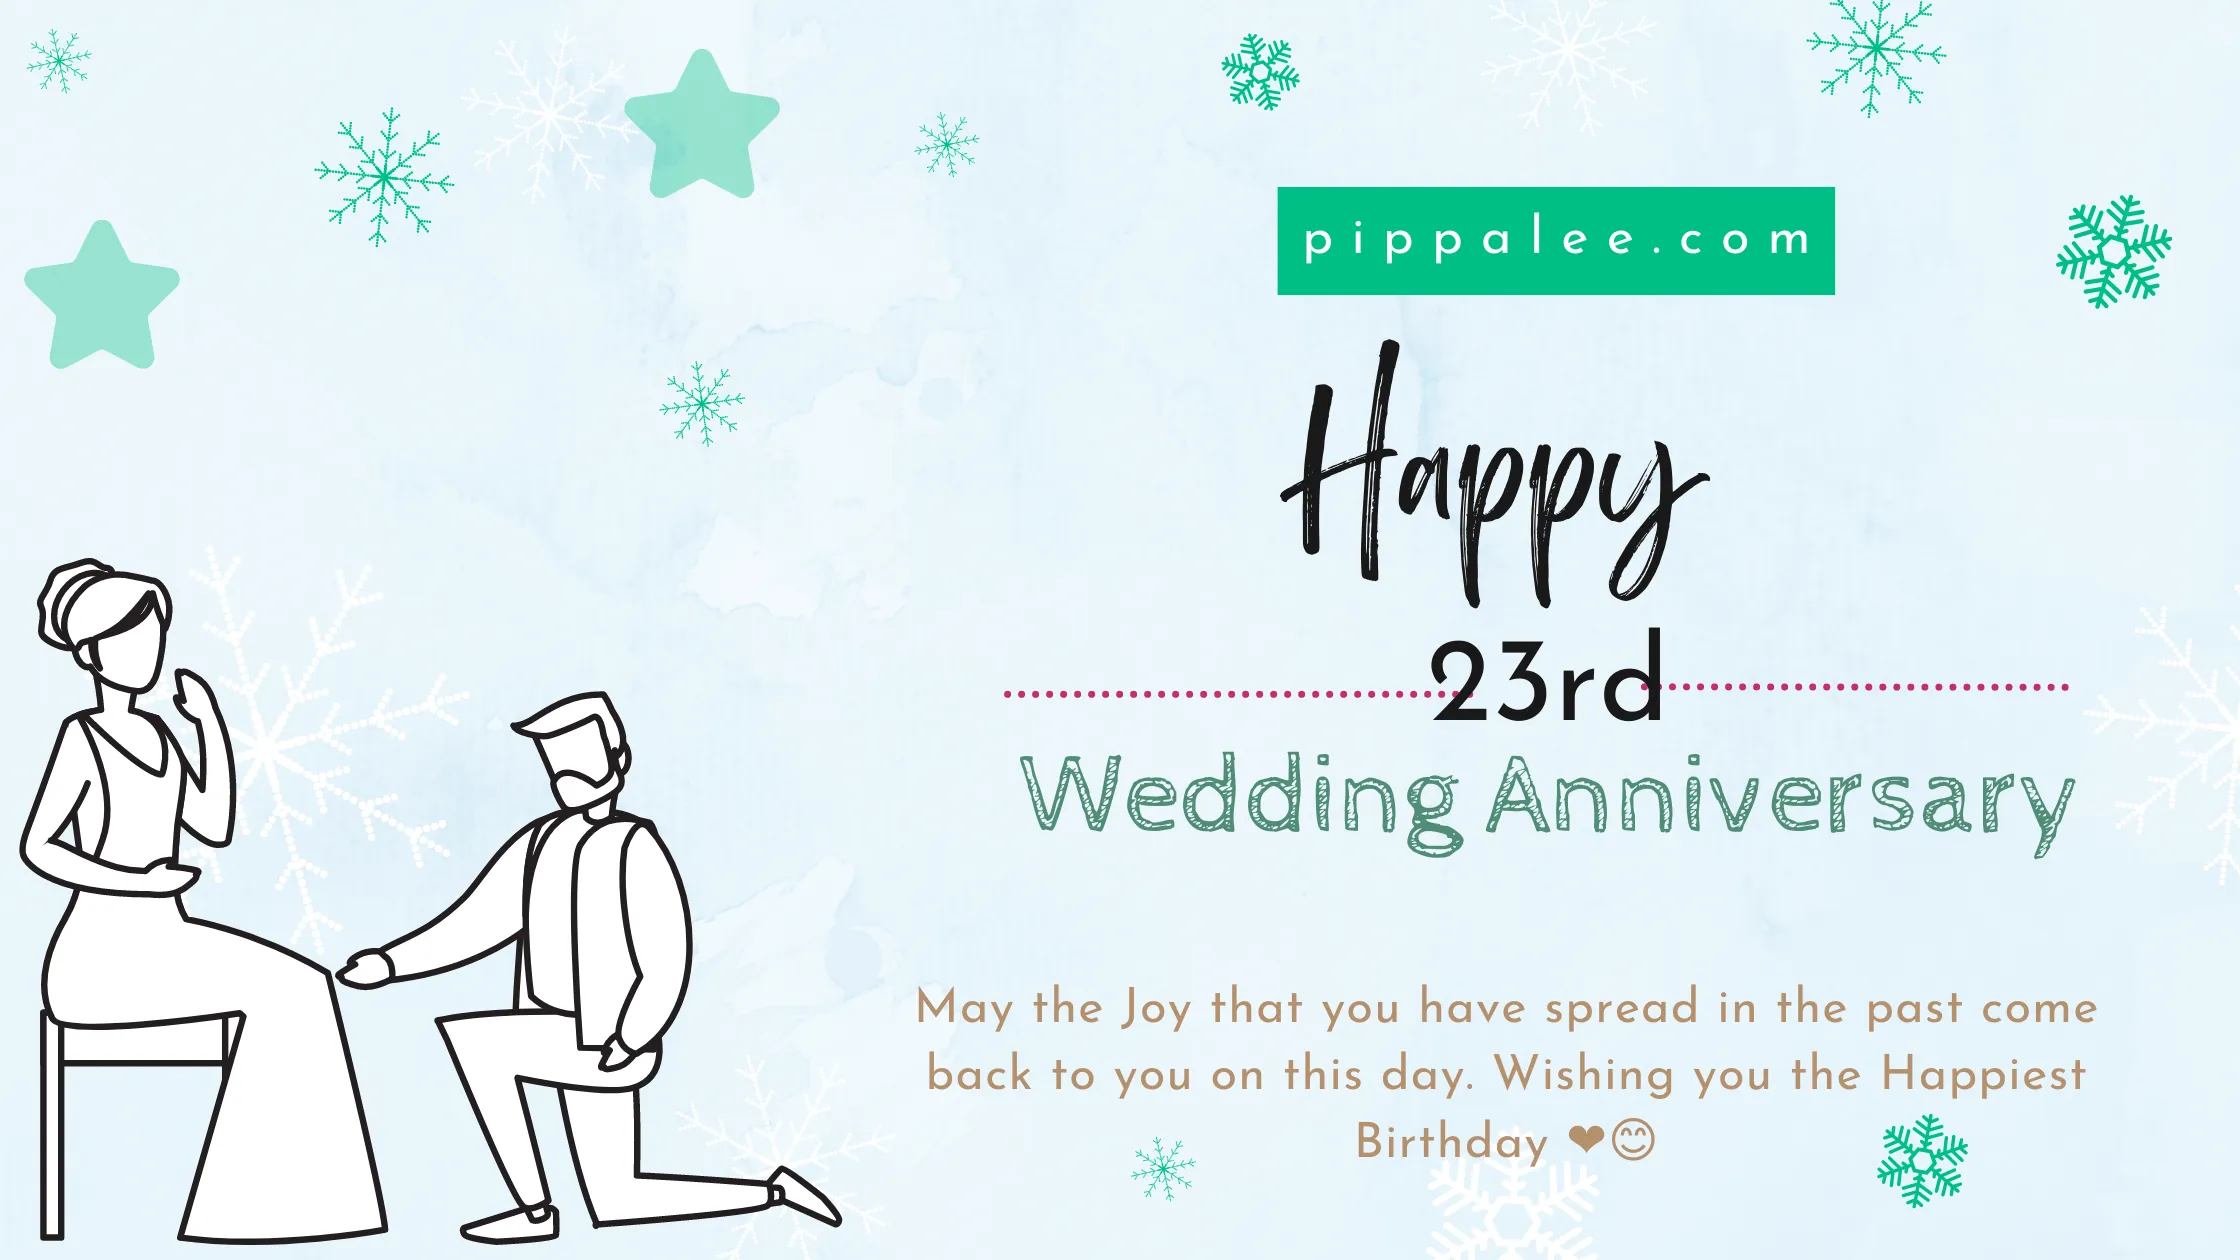 23rd Wedding Anniversary - Wishes & Messages